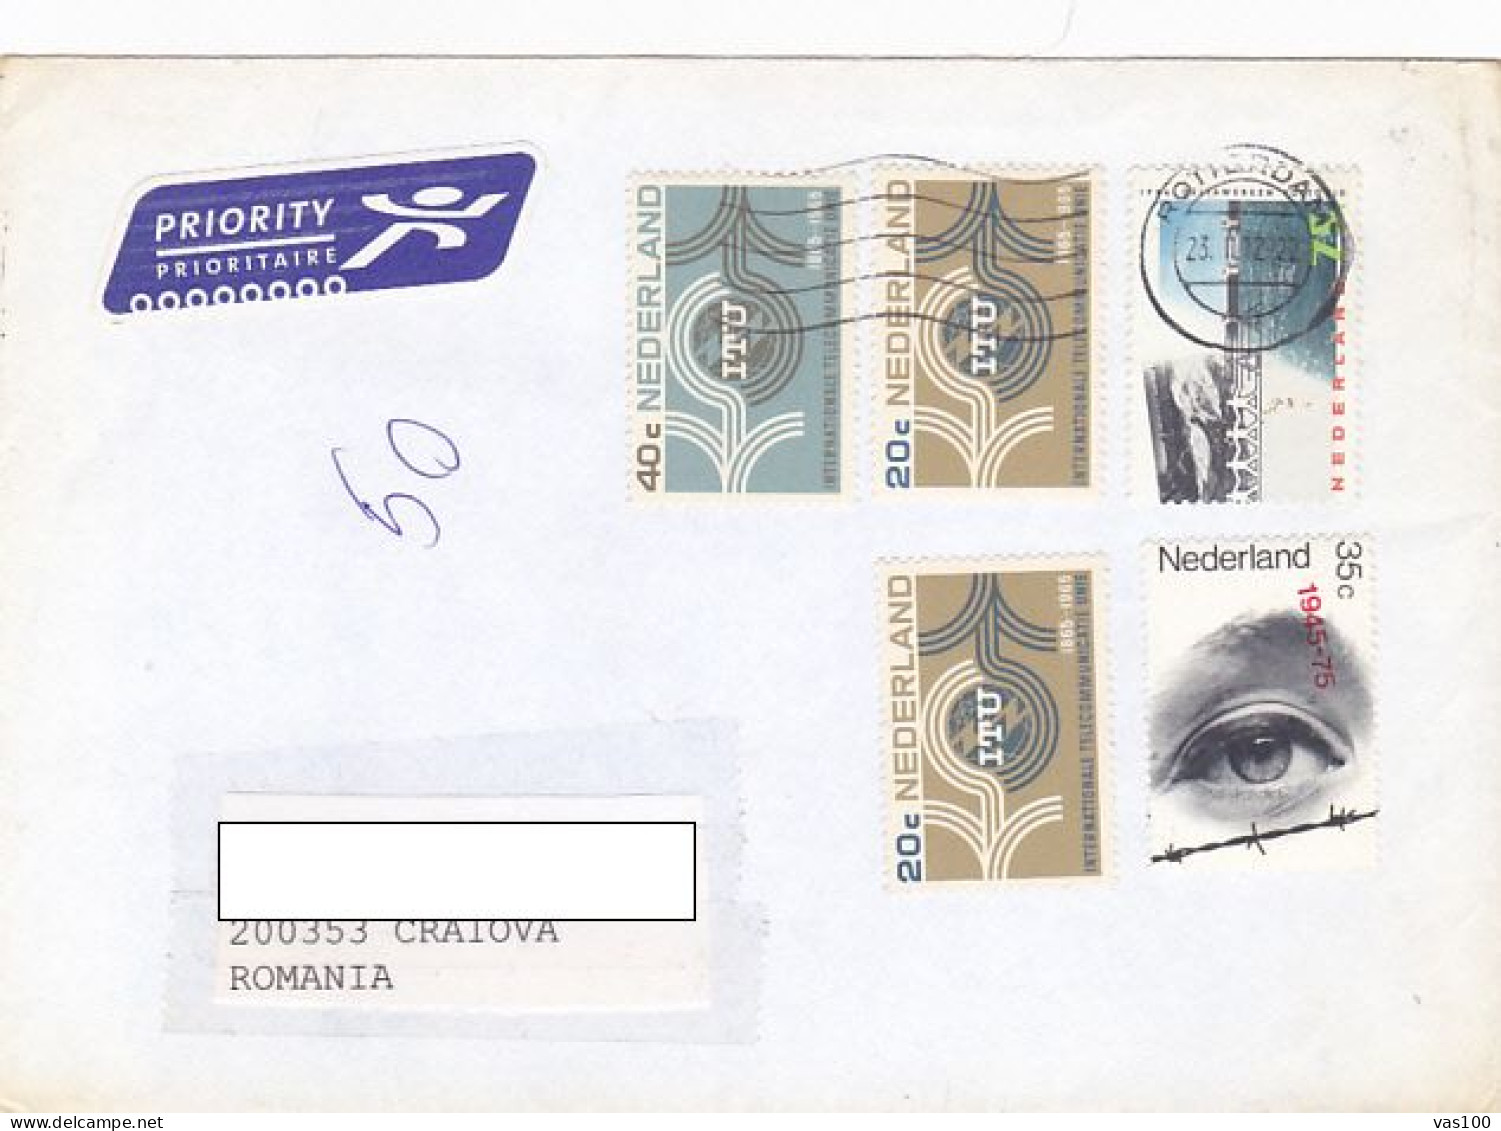 INTERNATIONAL TELECOMMUNICATIONS UNION, WW2- LIBERATION, DELTA WORKS, STAMPS ON COVER, 2012, NETHERLANDS - Covers & Documents